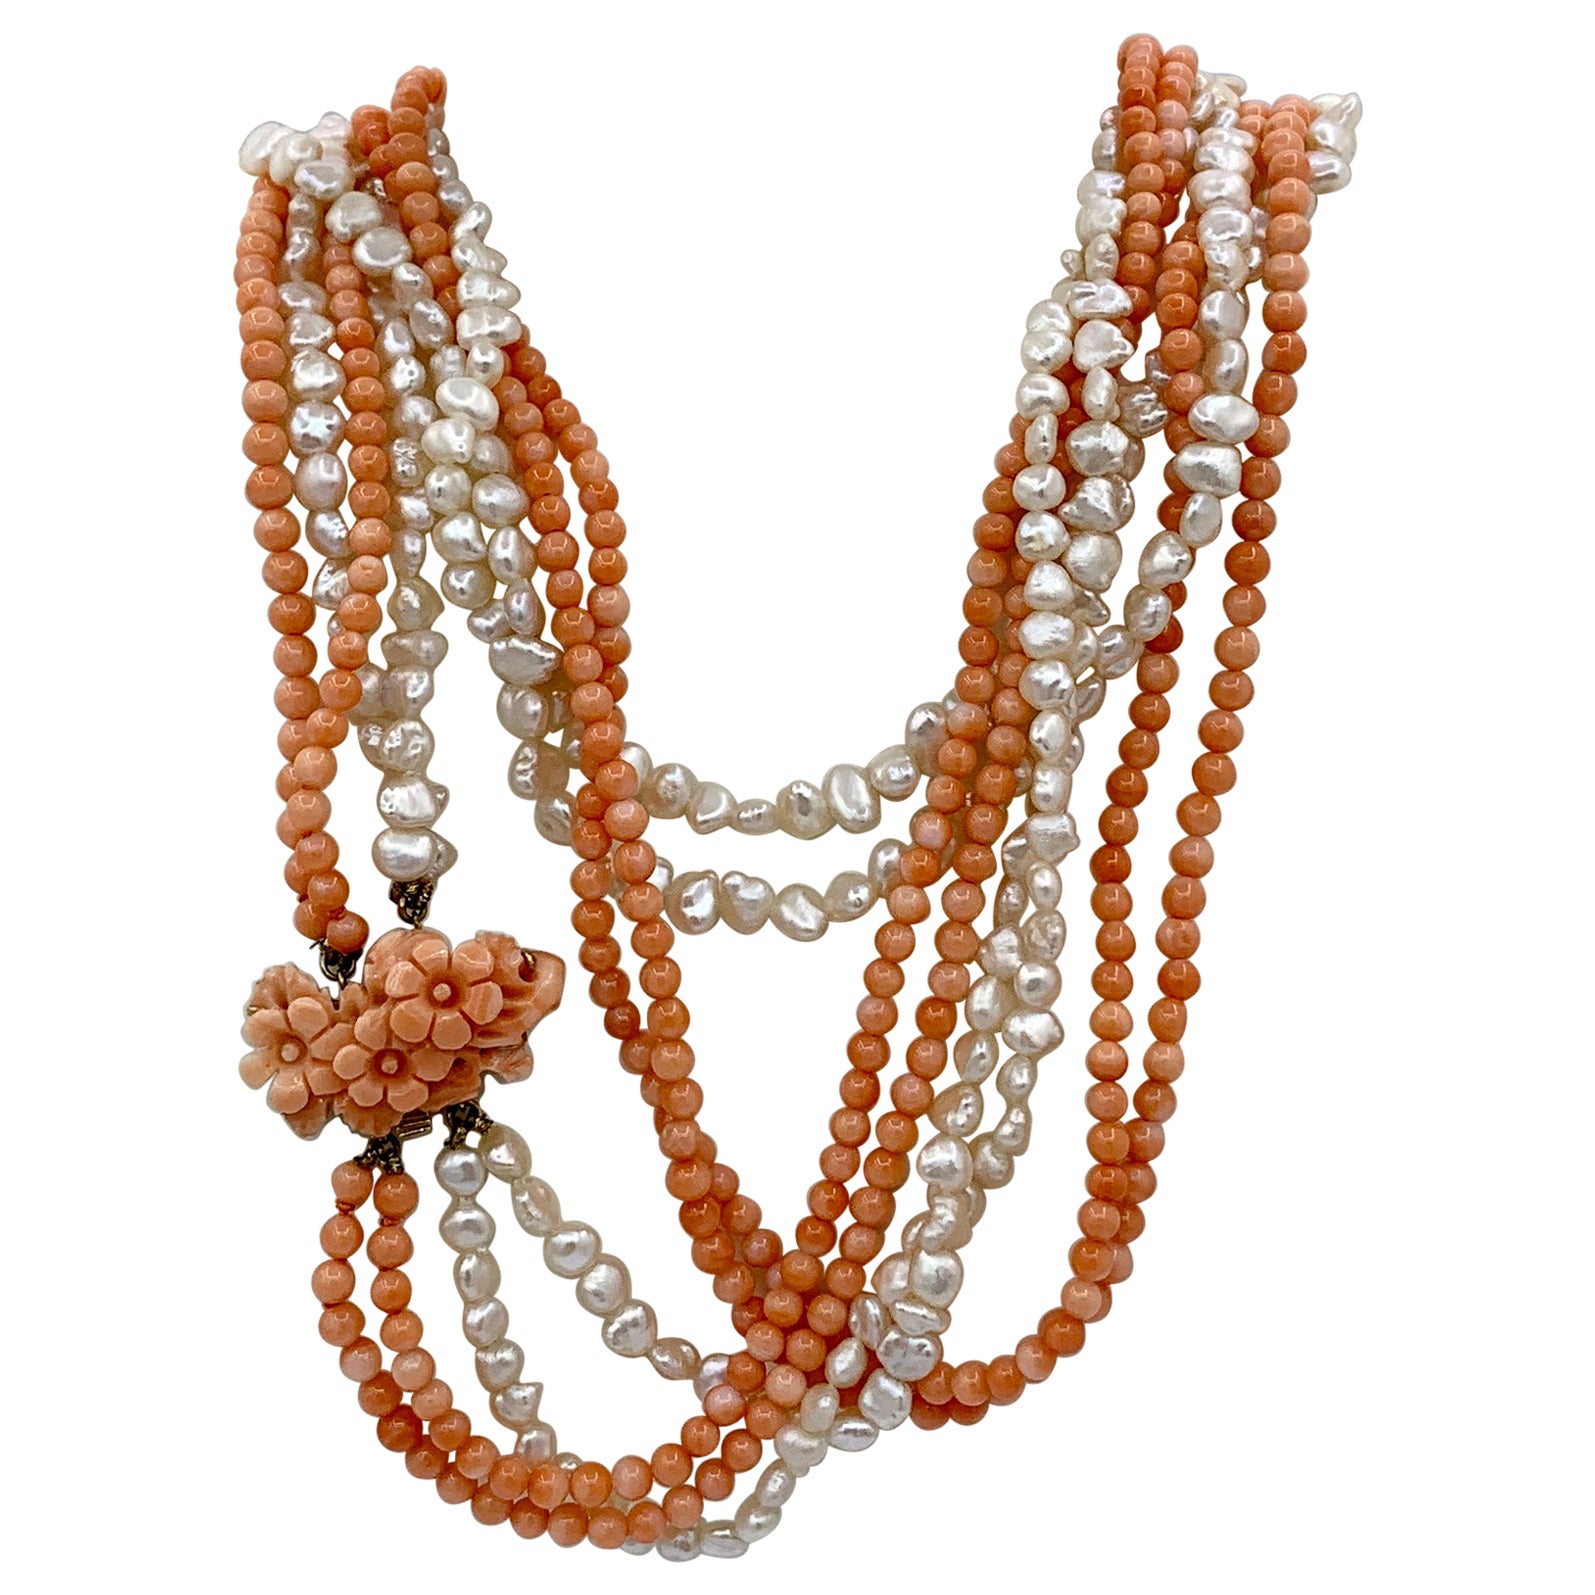 32 Inch Coral Flower Pearl Necklace 14 Karat Gold 4 Strand Hand Carved For Sale